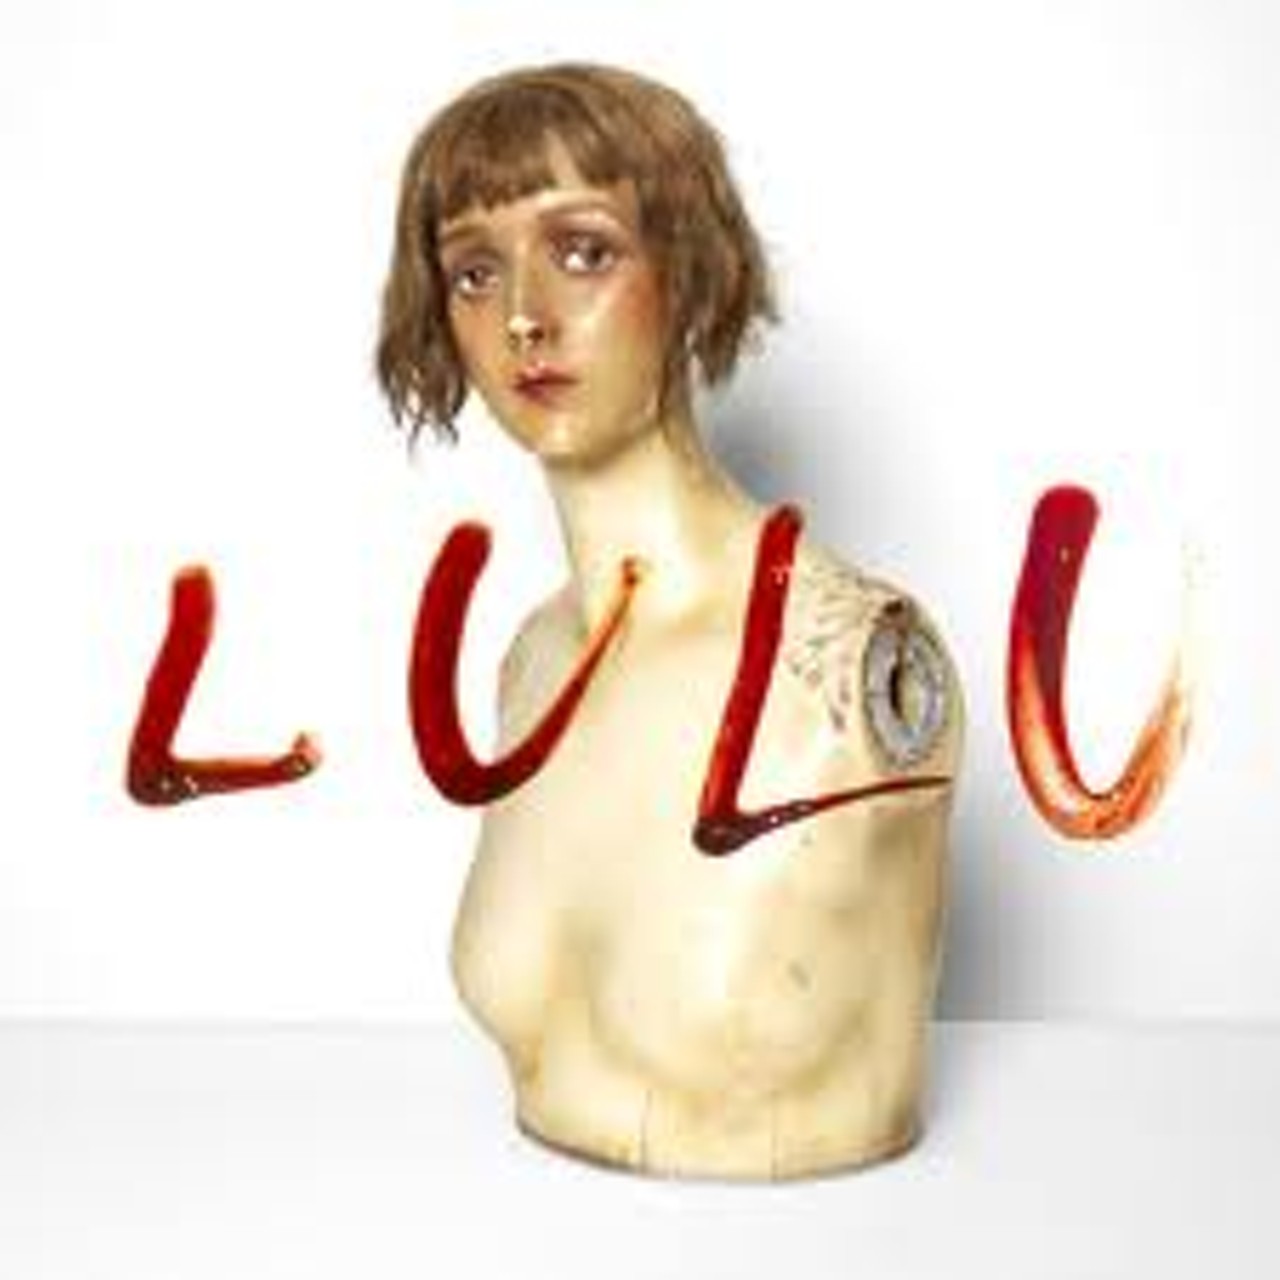 Lulu
Never one to take the easy option, Reed’s final record was 2011’s much-maligned Lulu, an album that saw him team up with thrash metal band Metallica and create some typically awkward, uncomfortably difficult music. As a swan song, for that reason alone, it’s perfect.